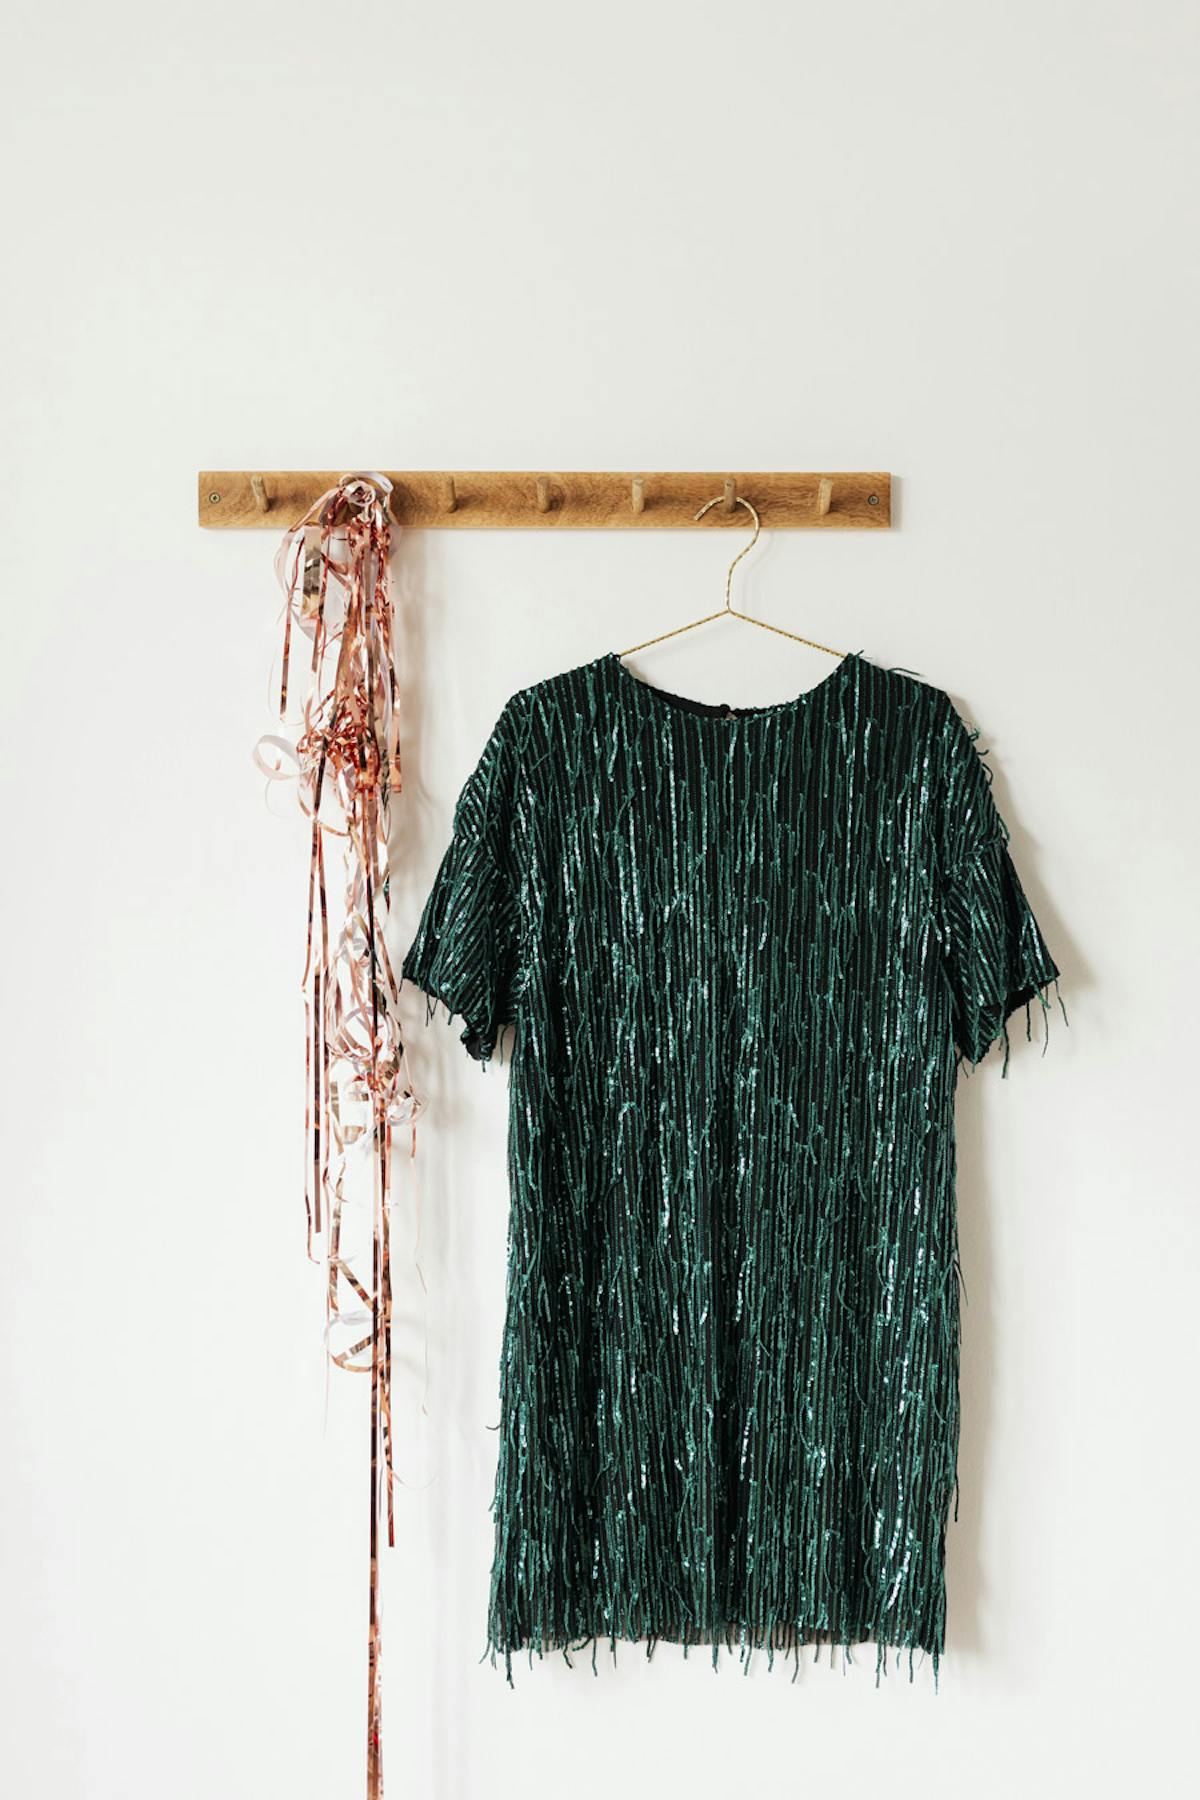  photo of dark green sequin dress hanging on a wall